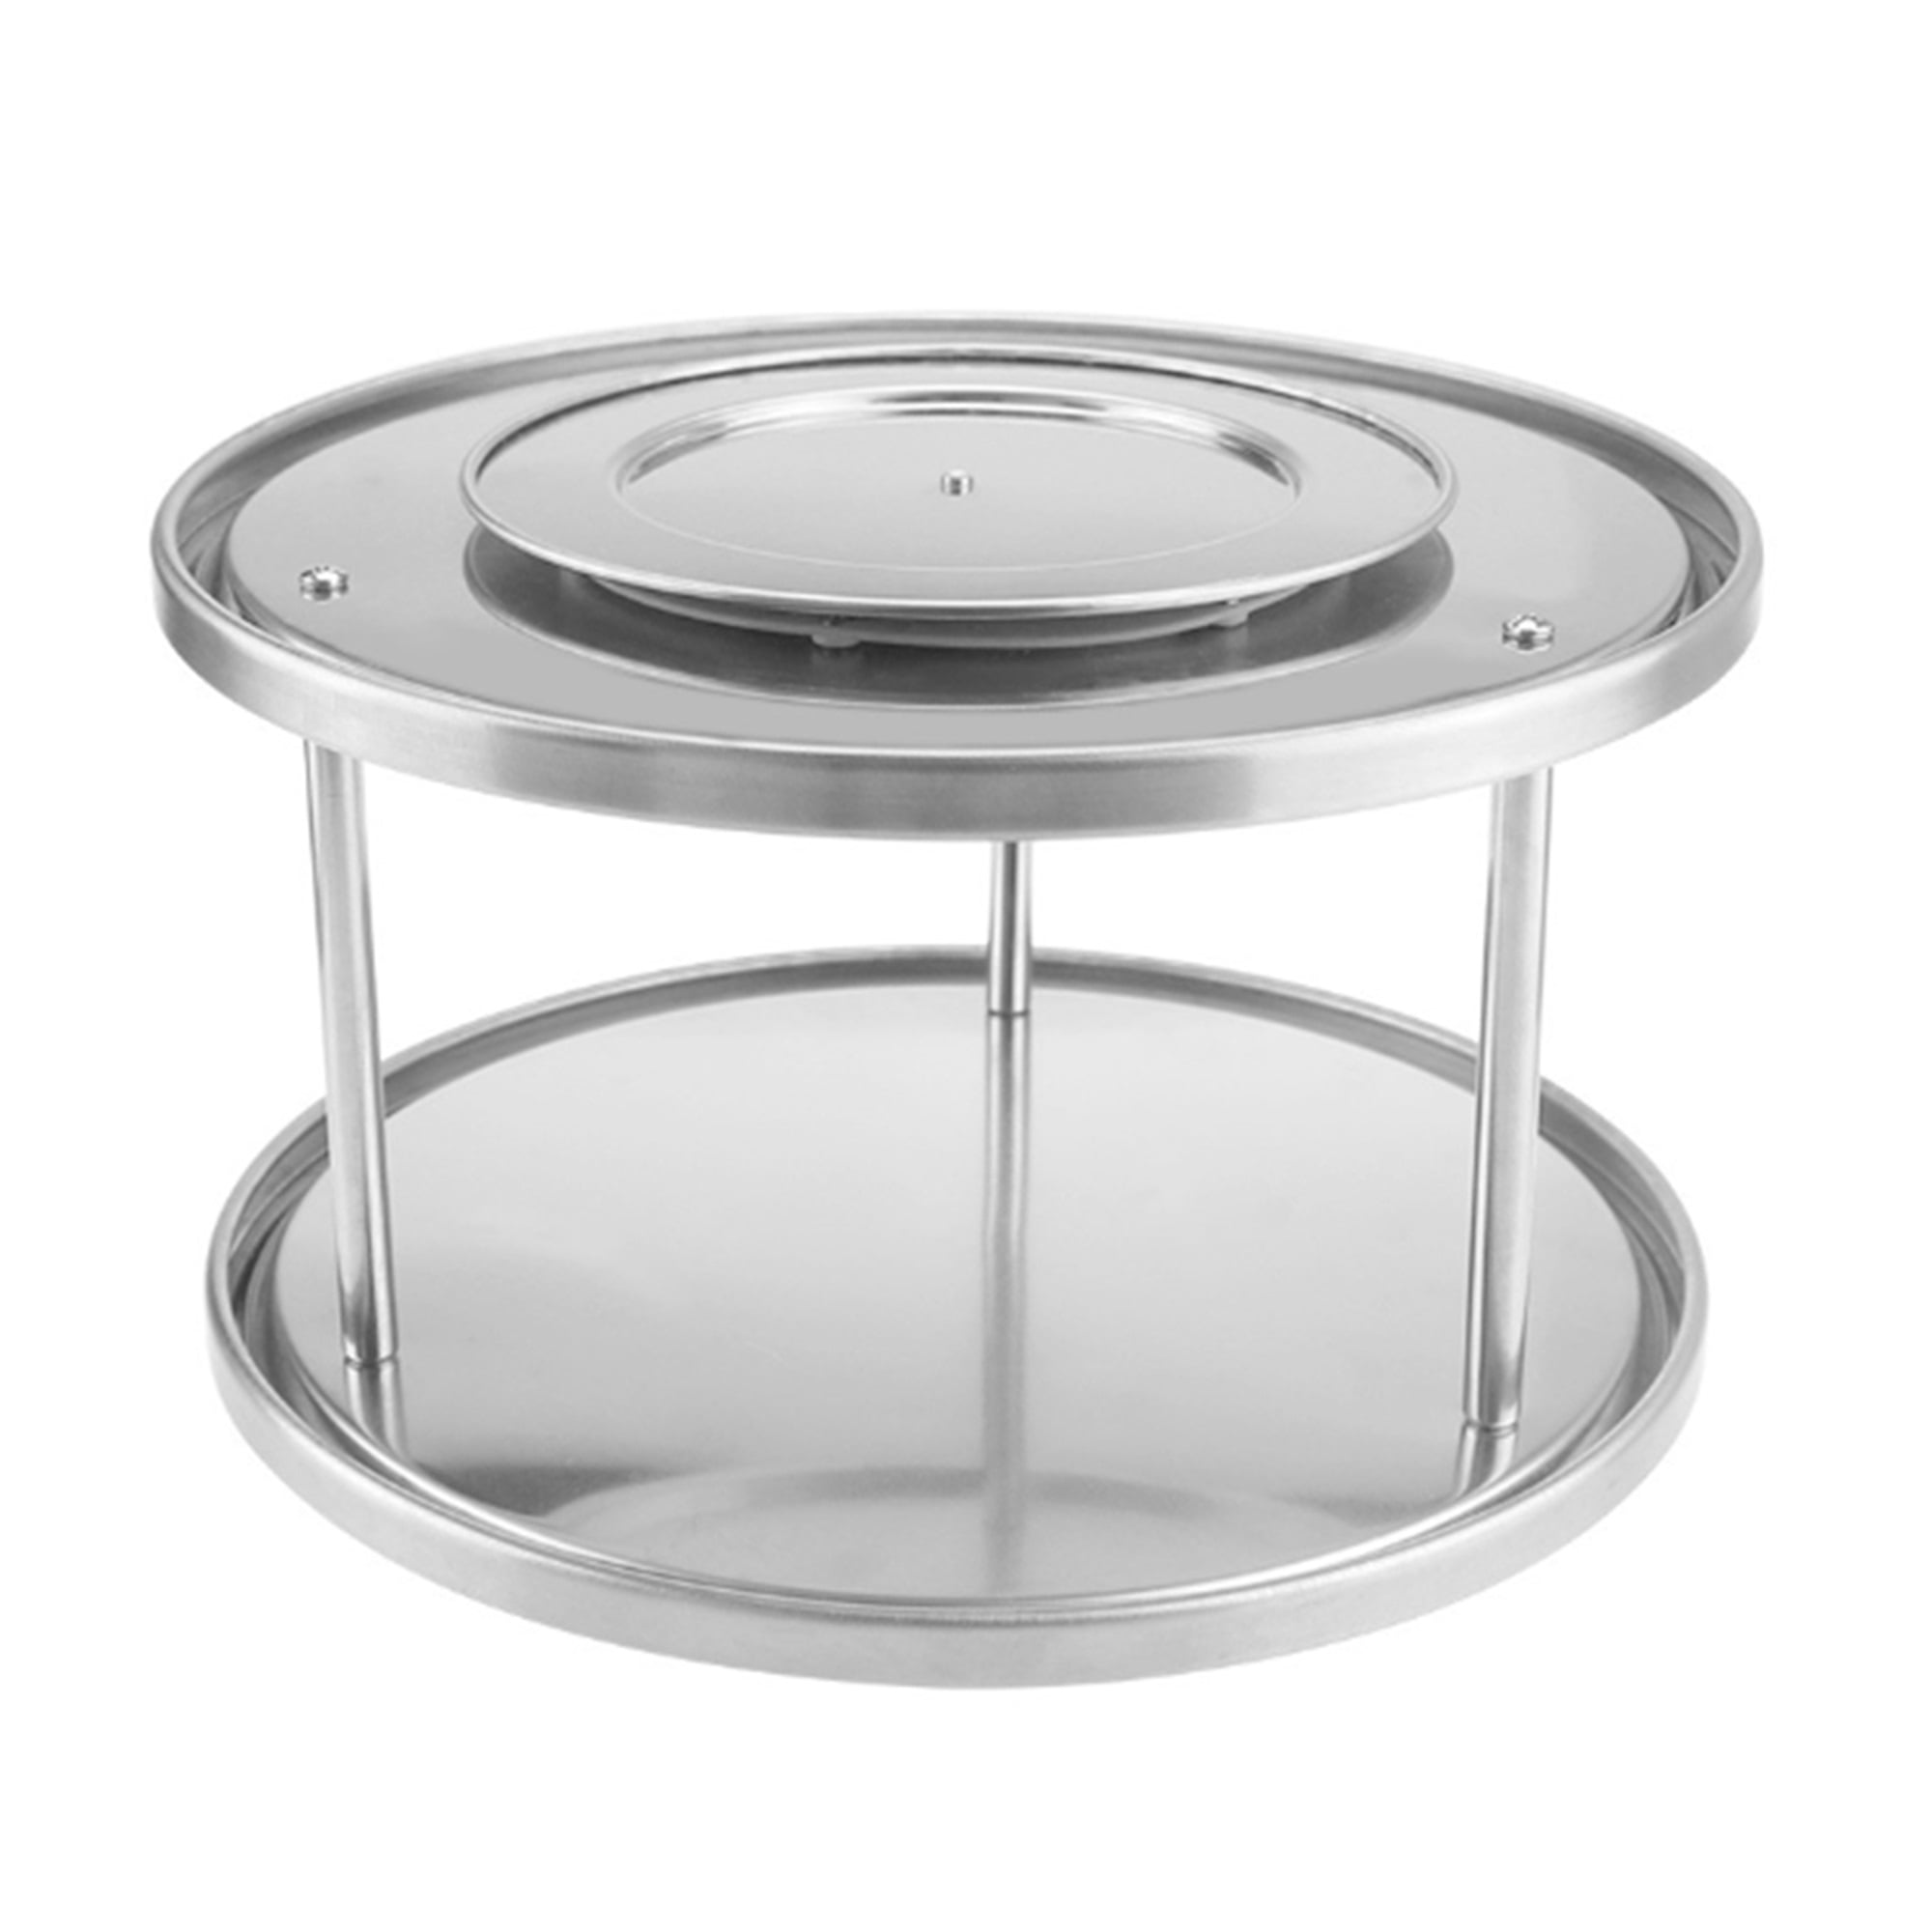 Stainless Steel 2 Tier Lazy Susan 360-degree Turntable Spice Organizer 